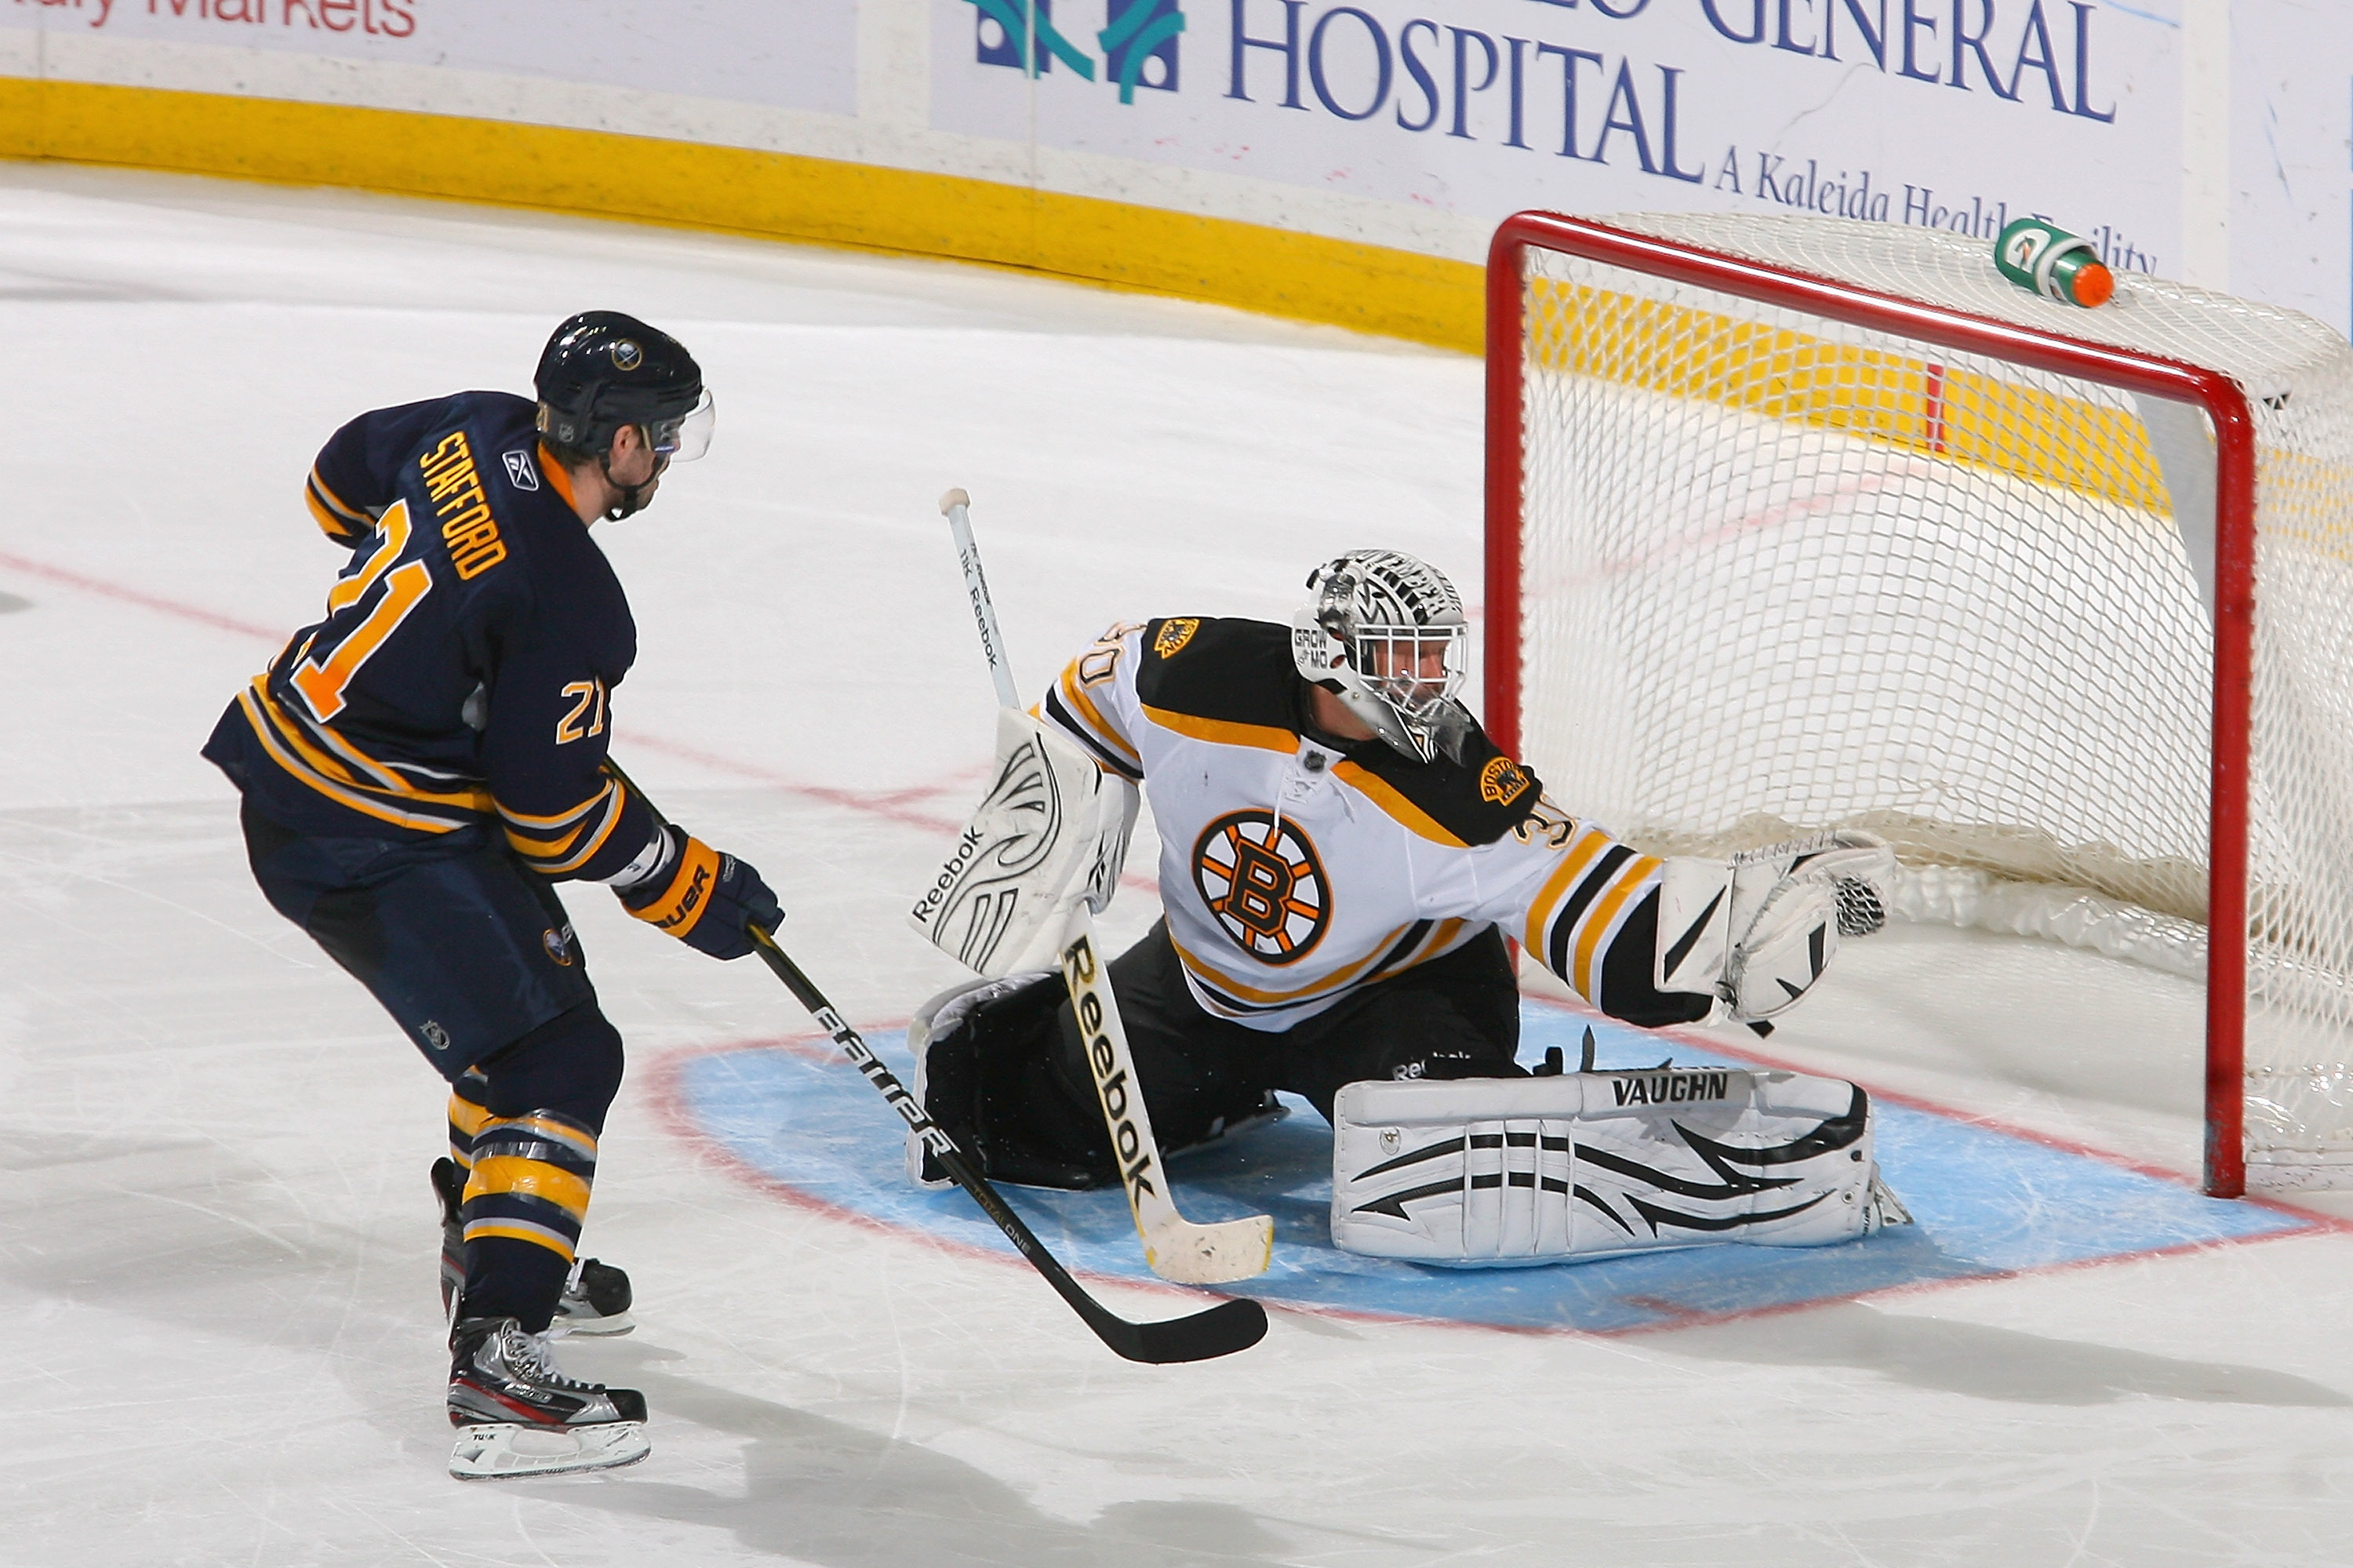 Goat head' energy ignites Sabres in explosive 6-goal 3rd period, first  shutout win of season